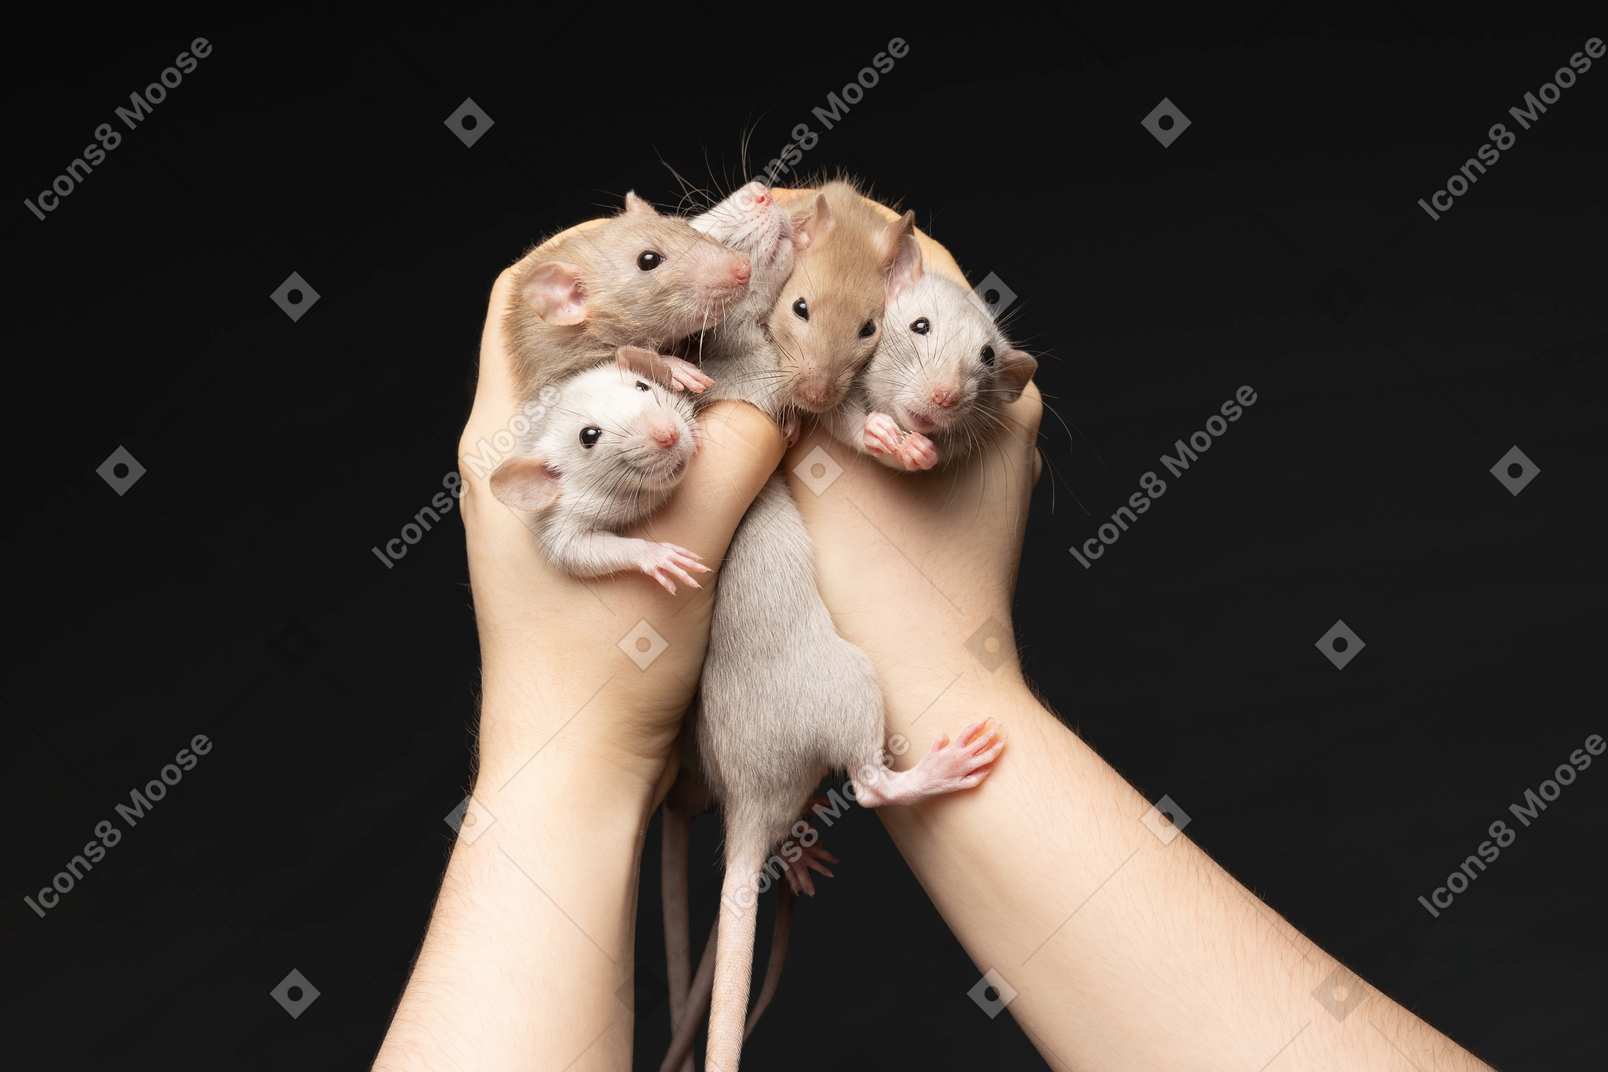 Bunch of mice held by human hands